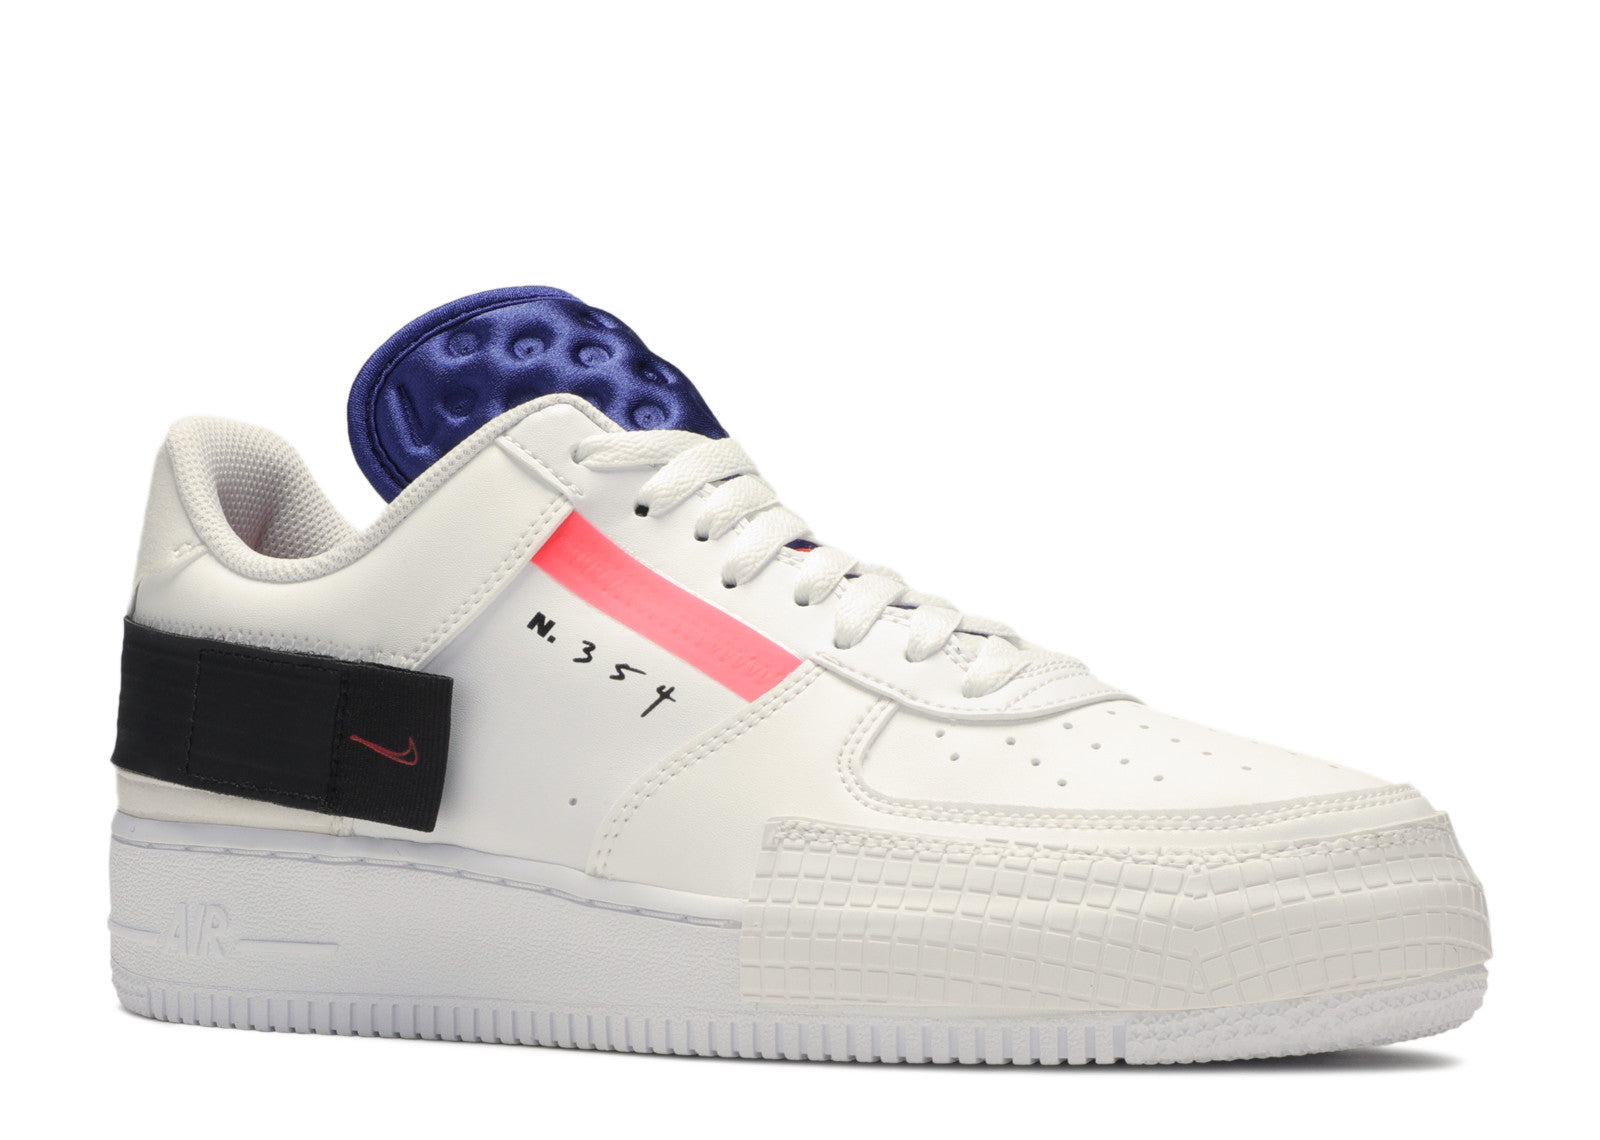 Nike Air Force 1 Low Type 'Summit White'